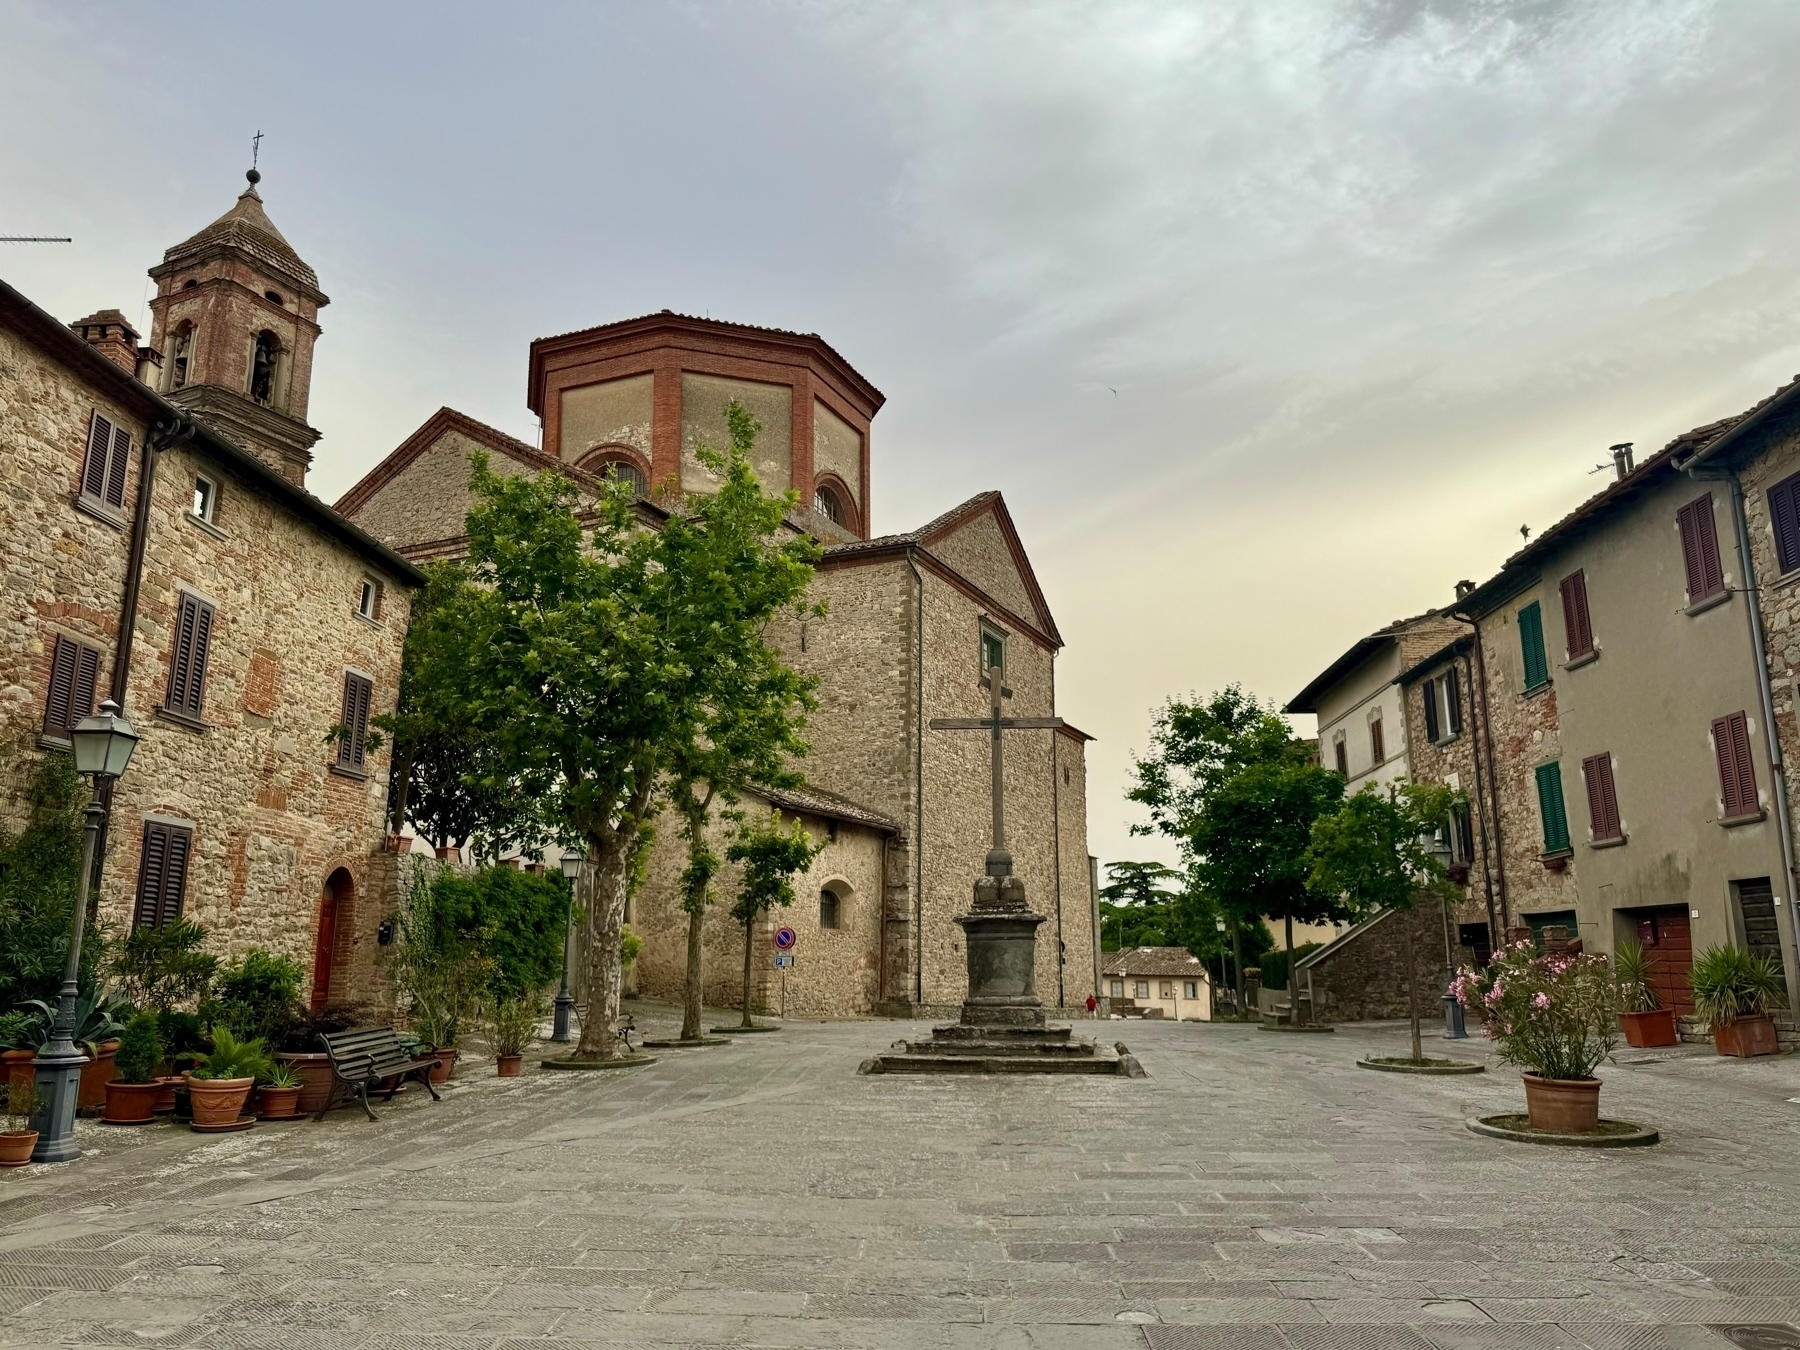 A quaint, empty village square with stone buildings, a church with a bell tower, and a large cross monument in the center. The scene features cobblestone pavement, potted plants, trees, and benches, all under a cloudy sky.